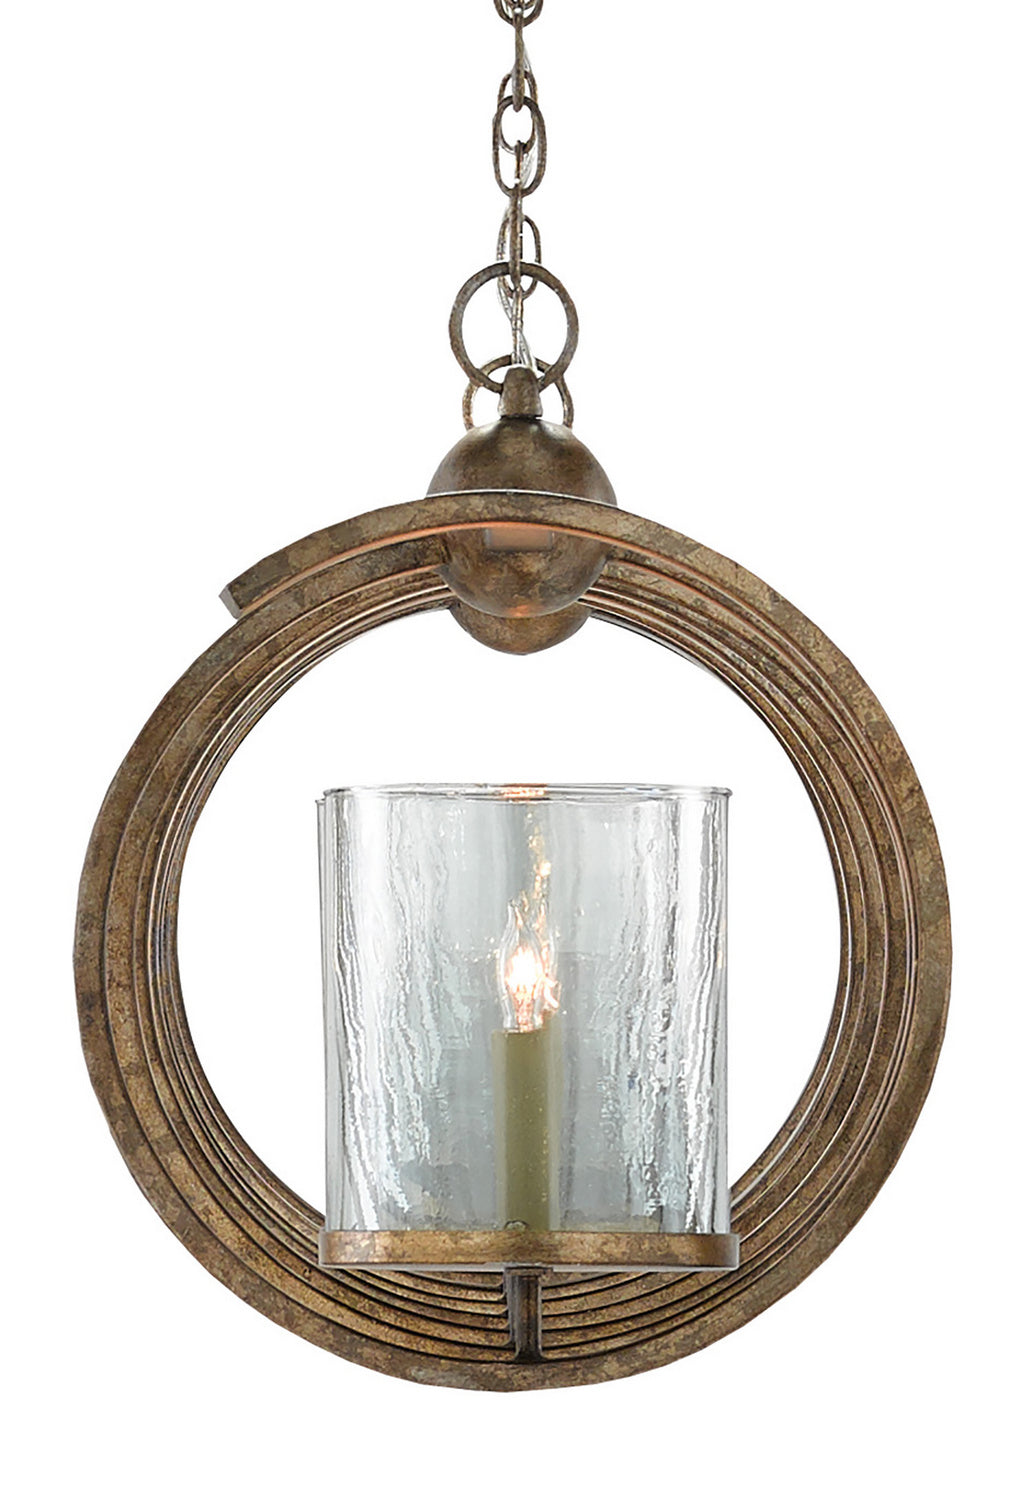 Seven Light Chandelier from the Maximus collection in Pyrite Bronze finish